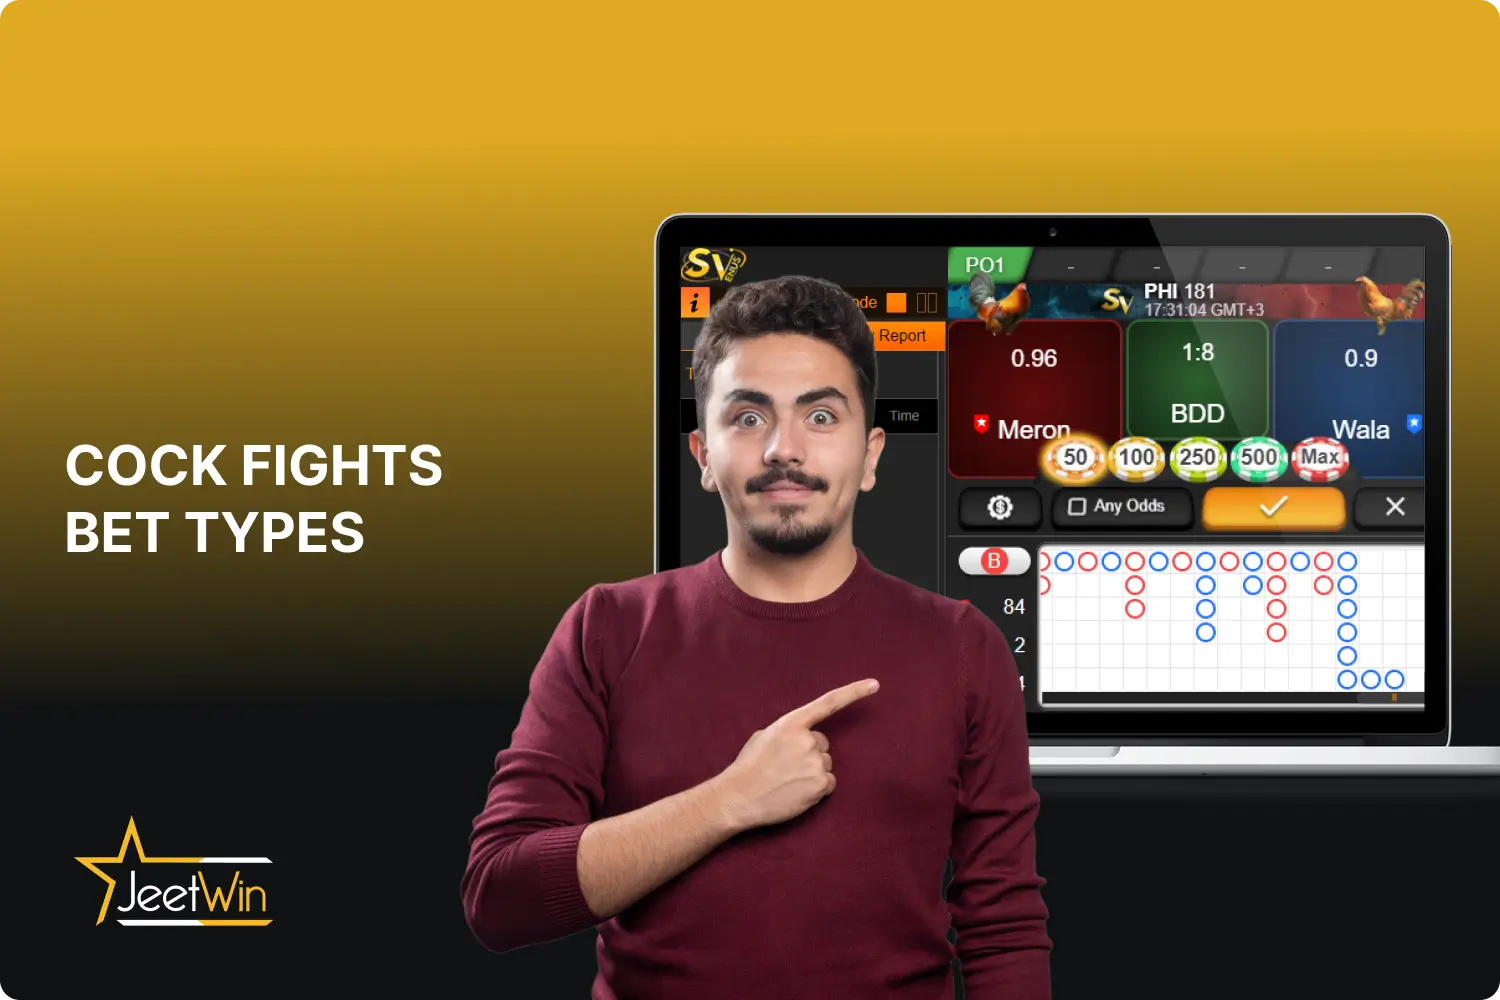 Users in India can place several types of bets on cock fights at Jeetwin